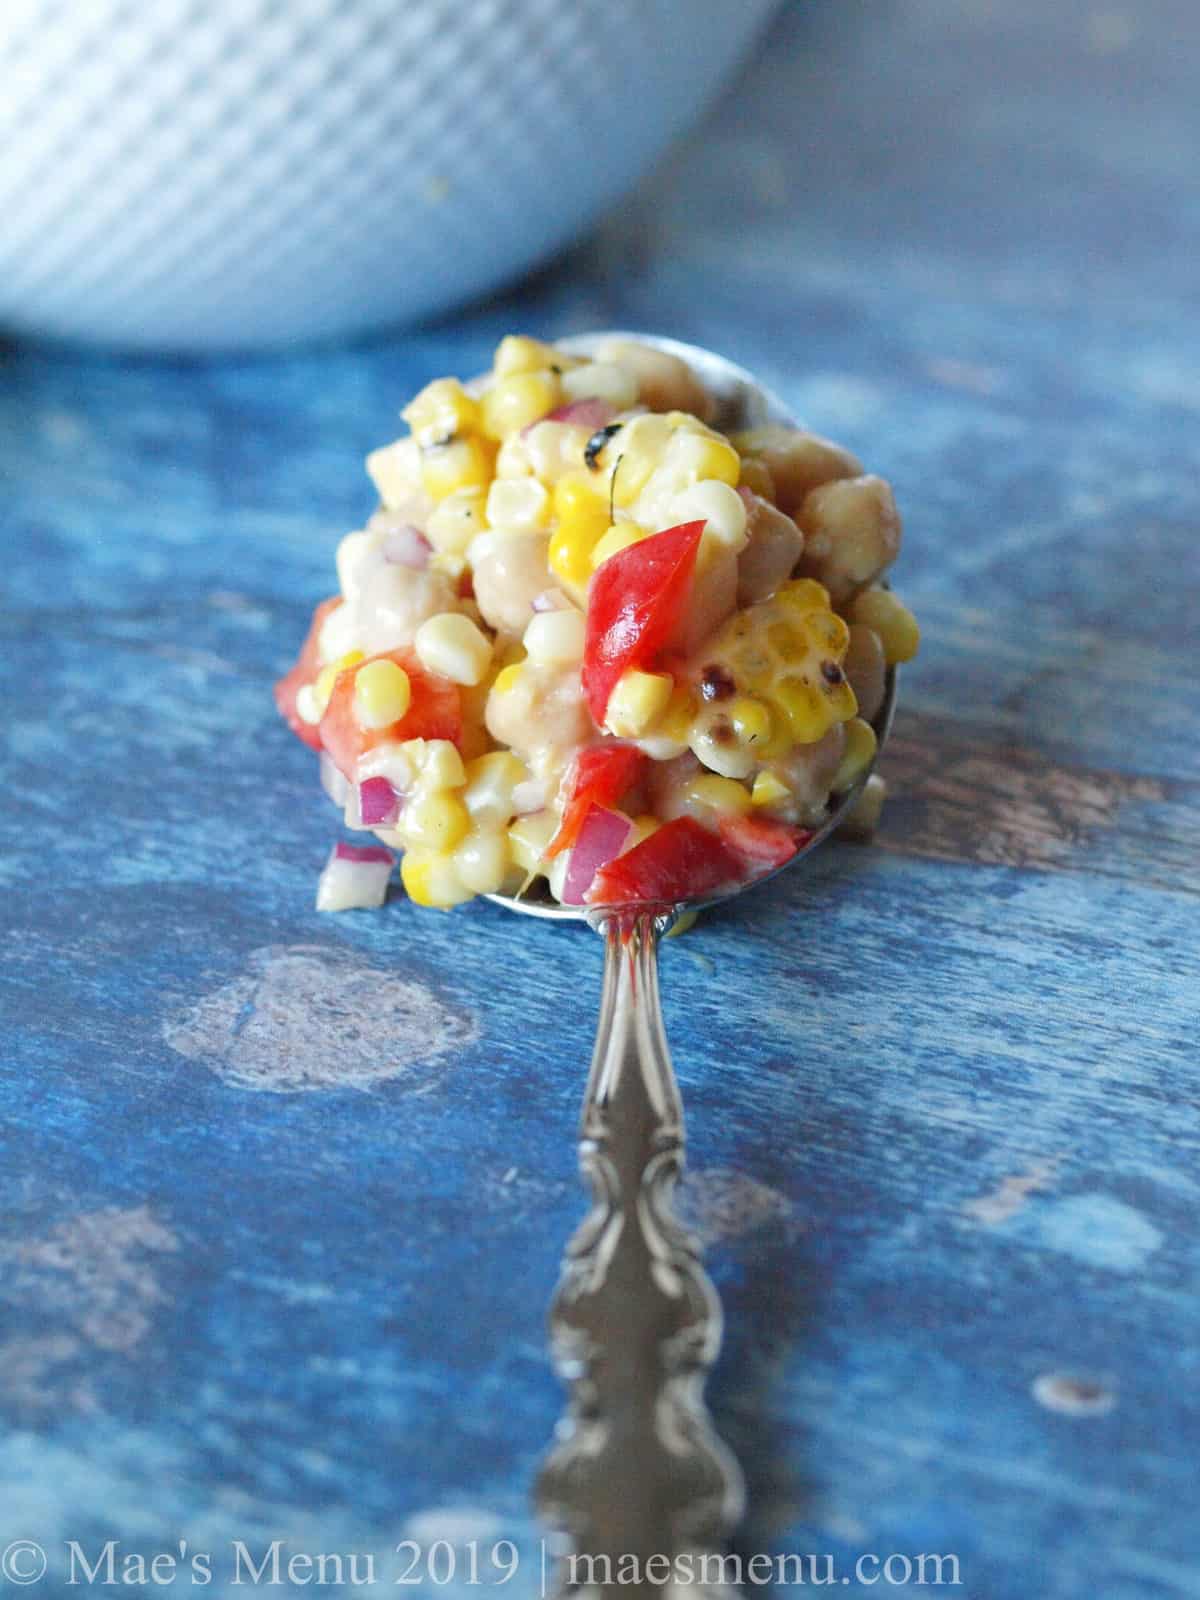 Large spoon full of Chickpea & Grilled Corn Salad with Roasted Garlic Salad Dressing.